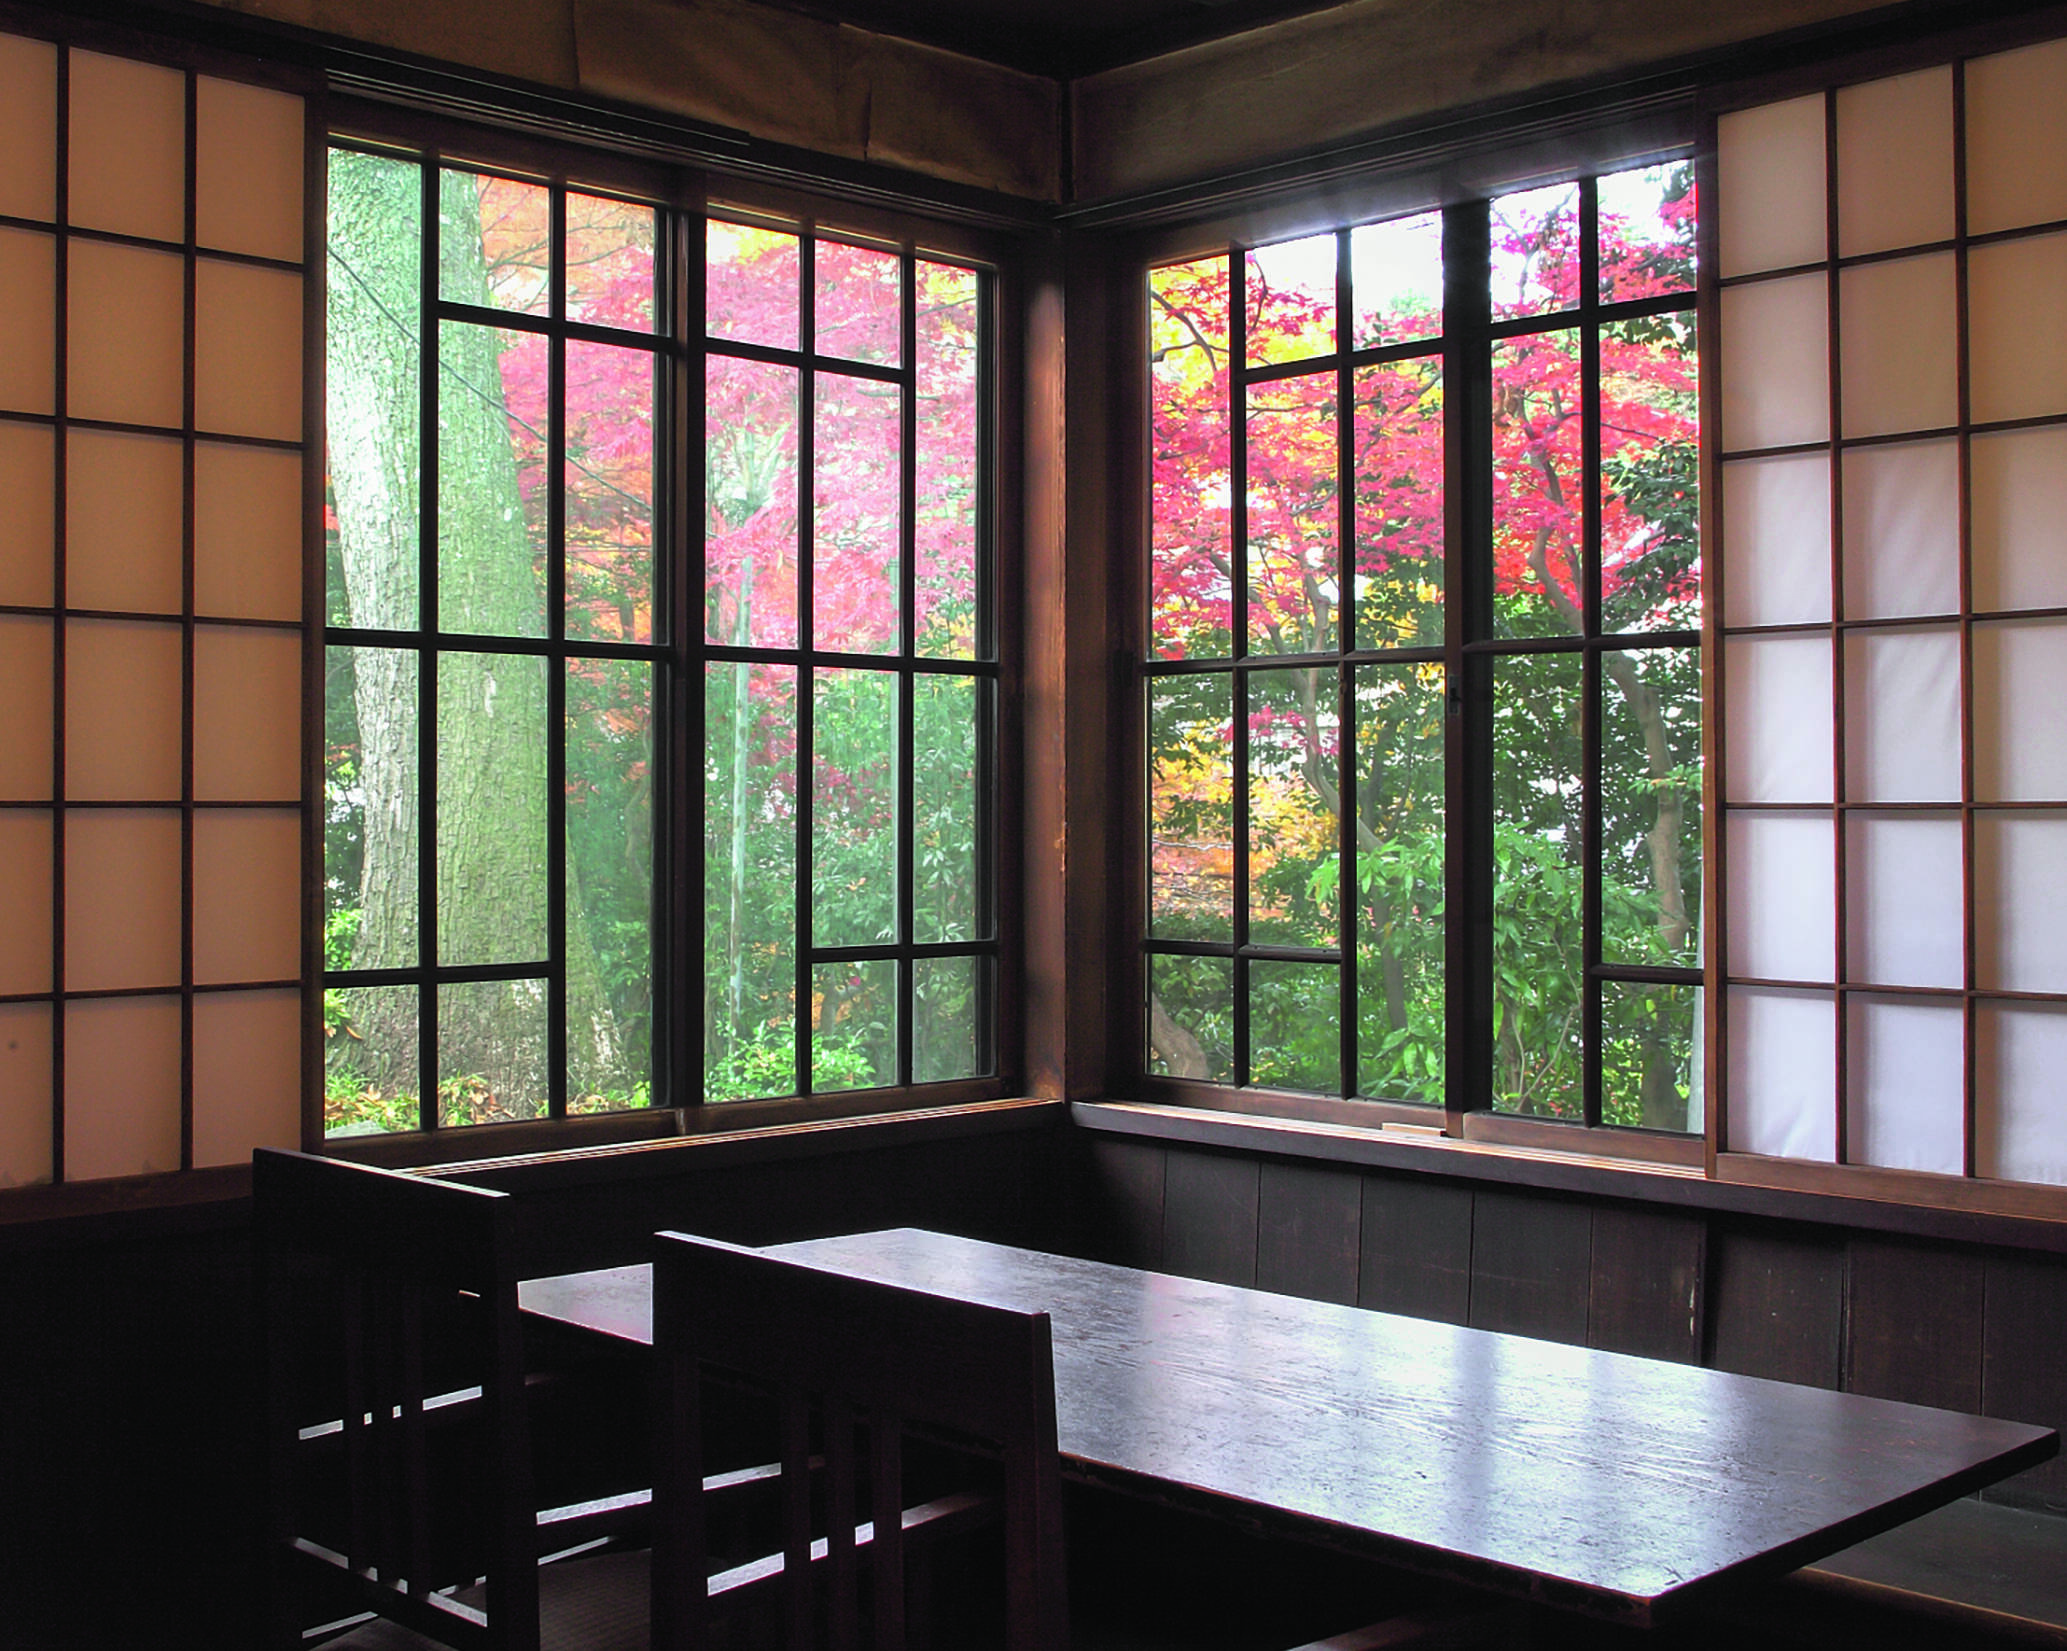 The Japanese interior where old first met new